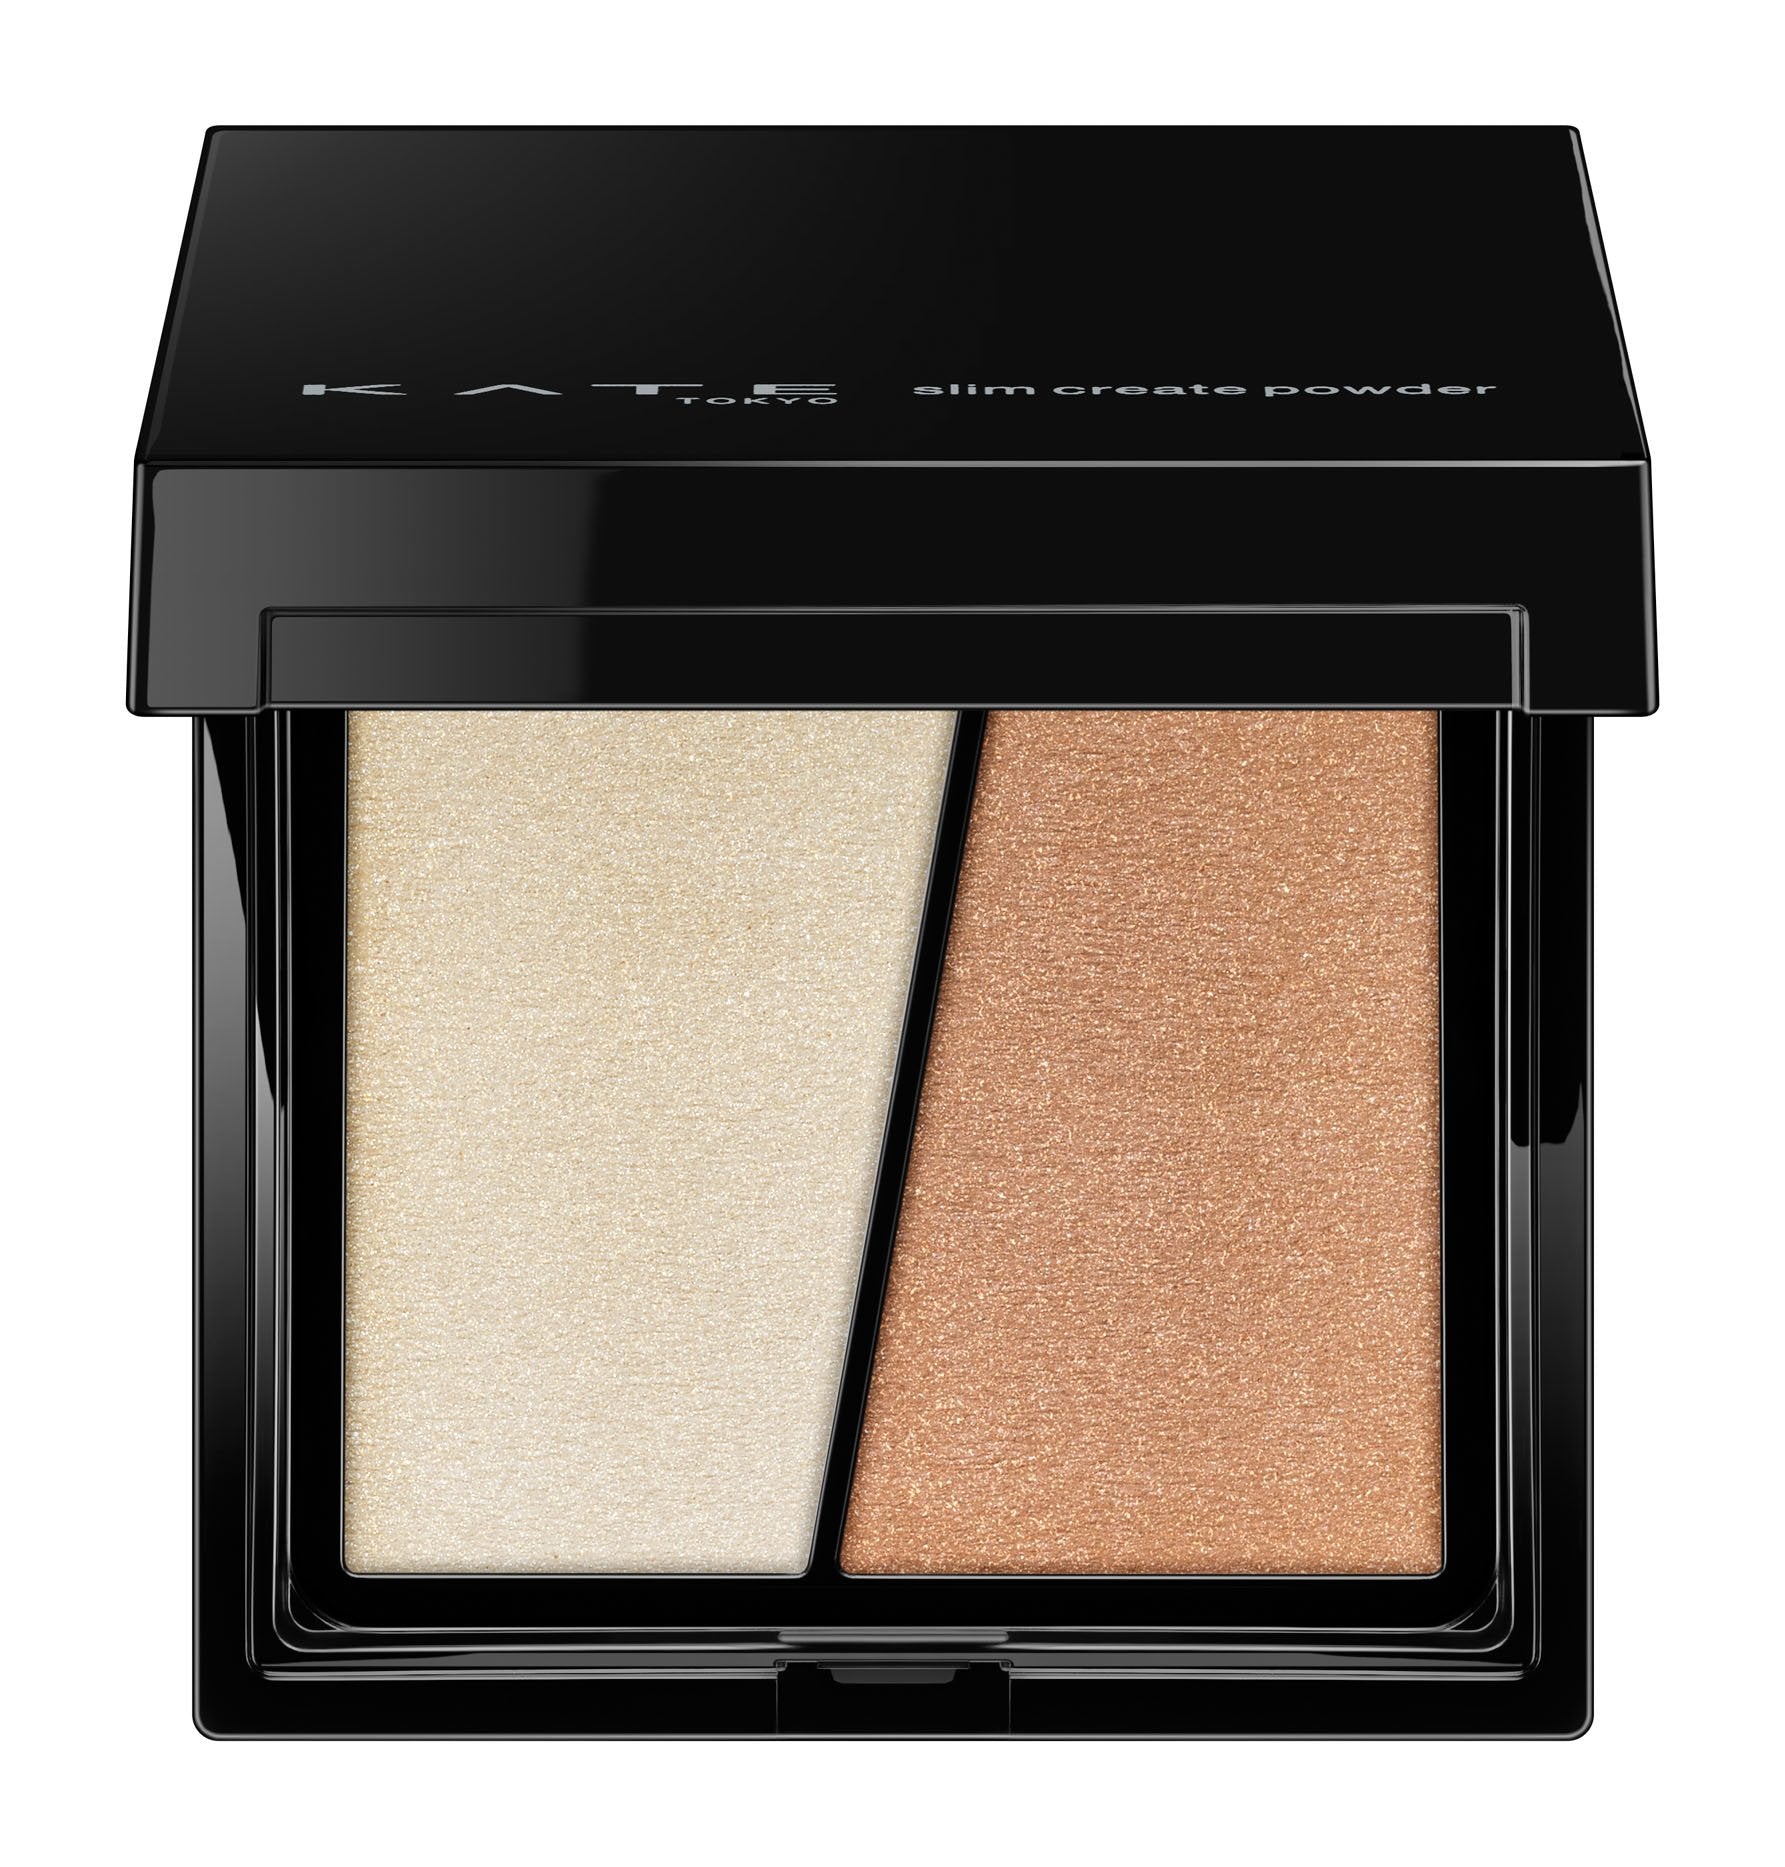 Kate Ex - 2 Glow Shading and Highlight Slim Create Powder for Radiant Glow